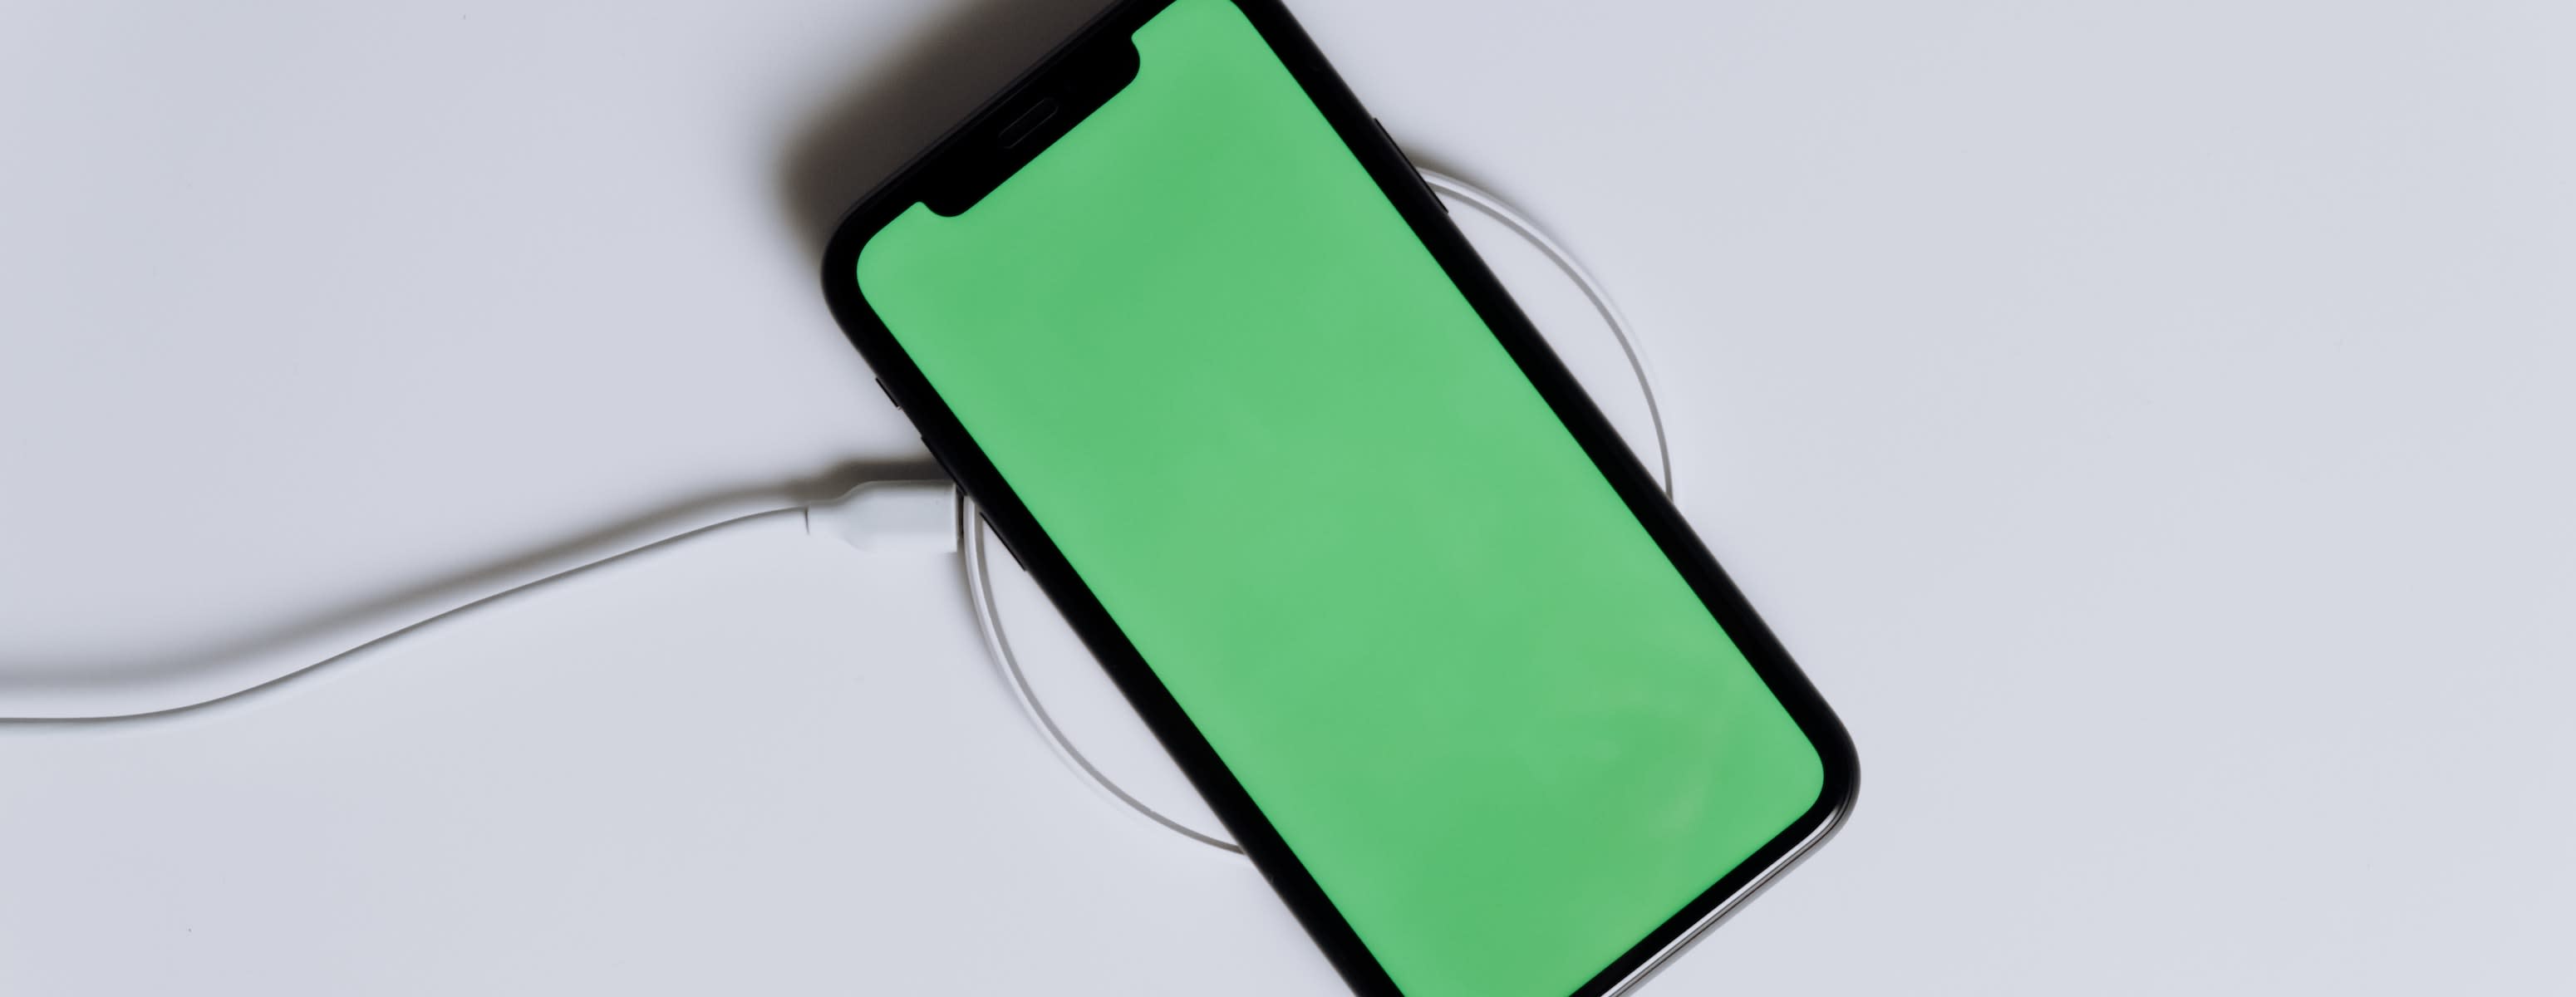 A mobile phone being wirelessly charged having full screen green